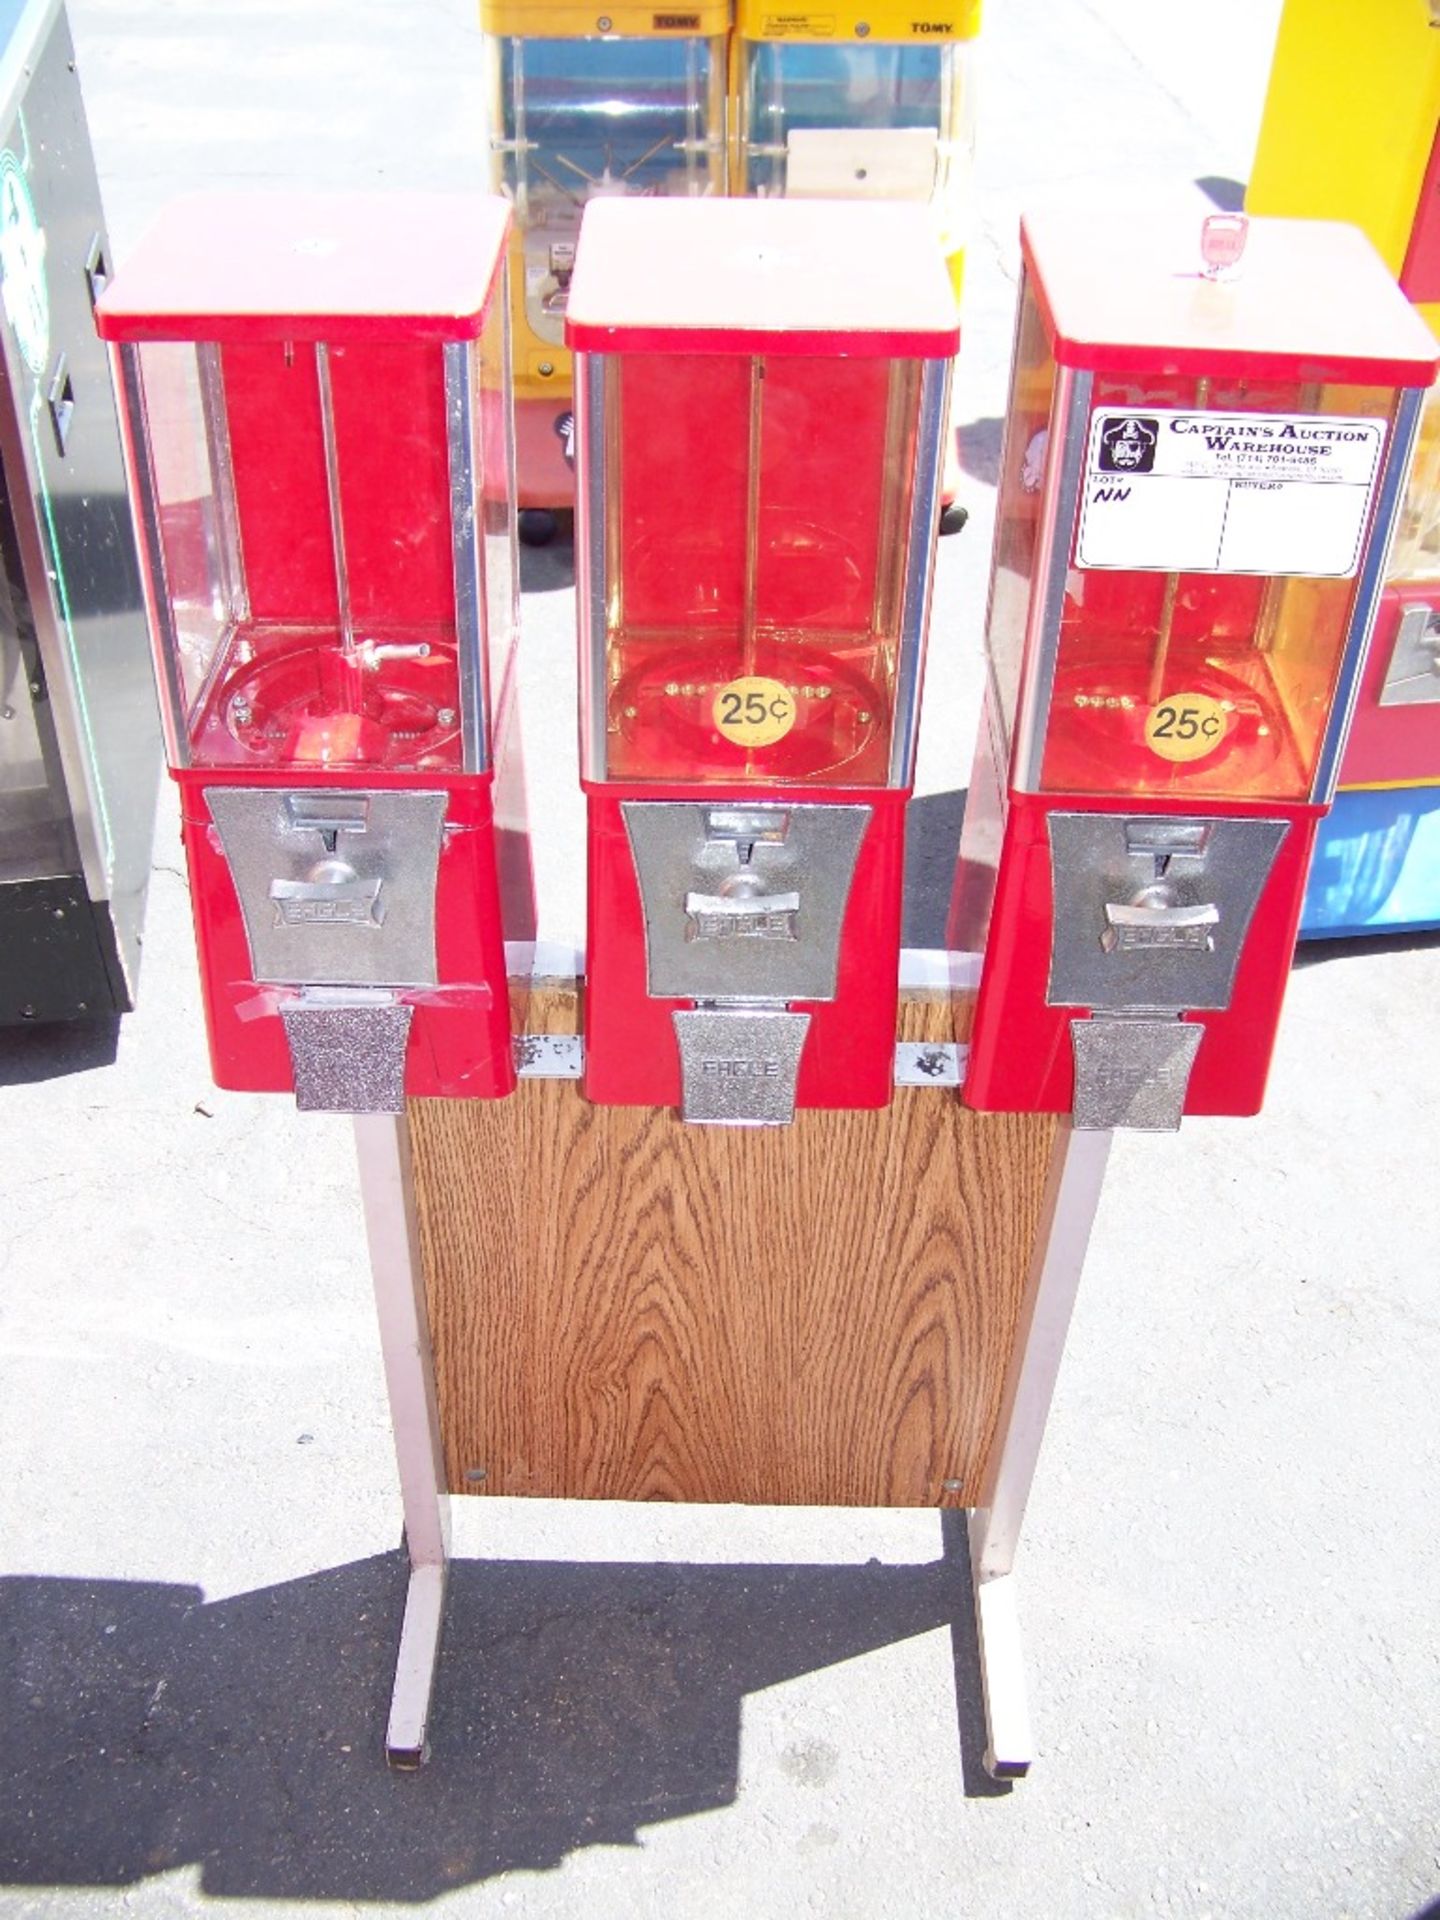 EAGLE 3 HEAD CANDY CAPSULE VENDING RACK Item is in used condition. Evidence of wear and